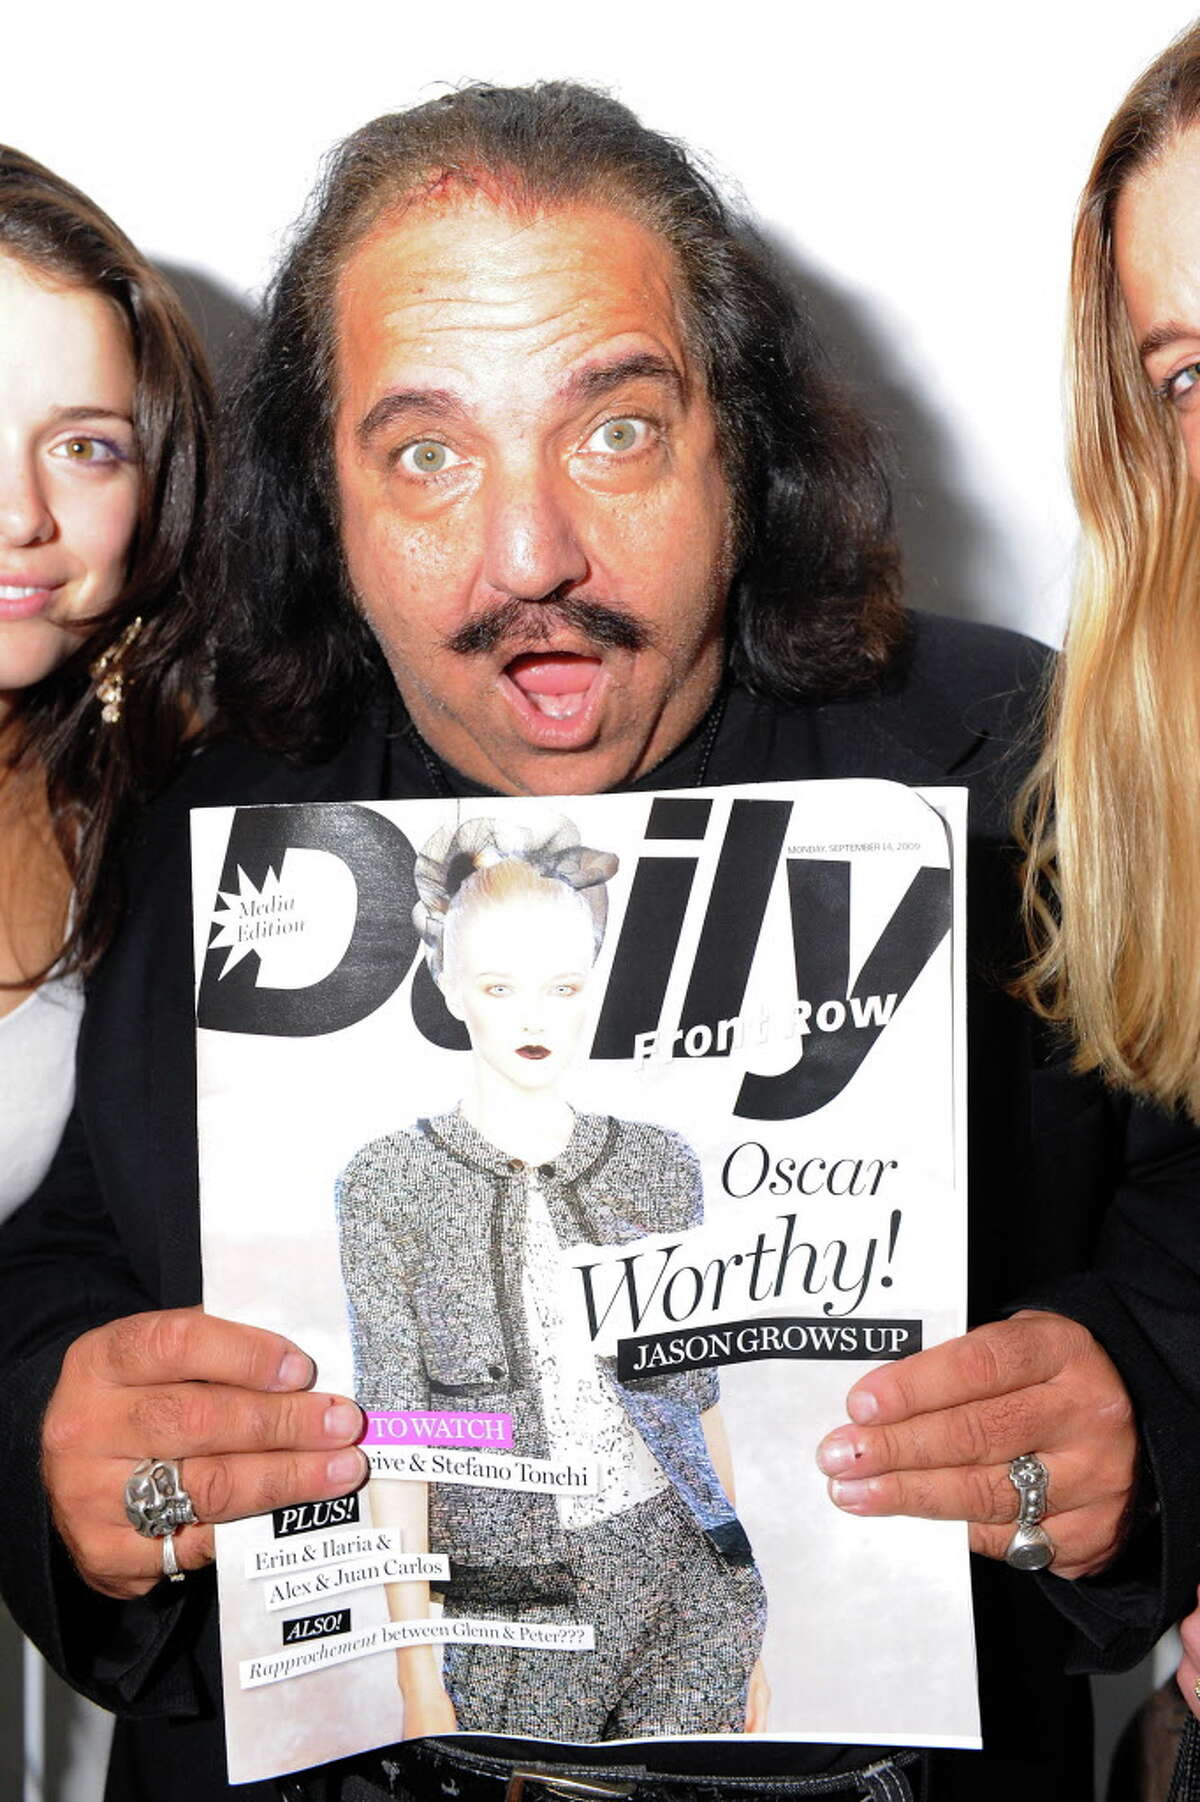 Porn star Ron Jeremy, pastor debate Wednesday at Proctors pic